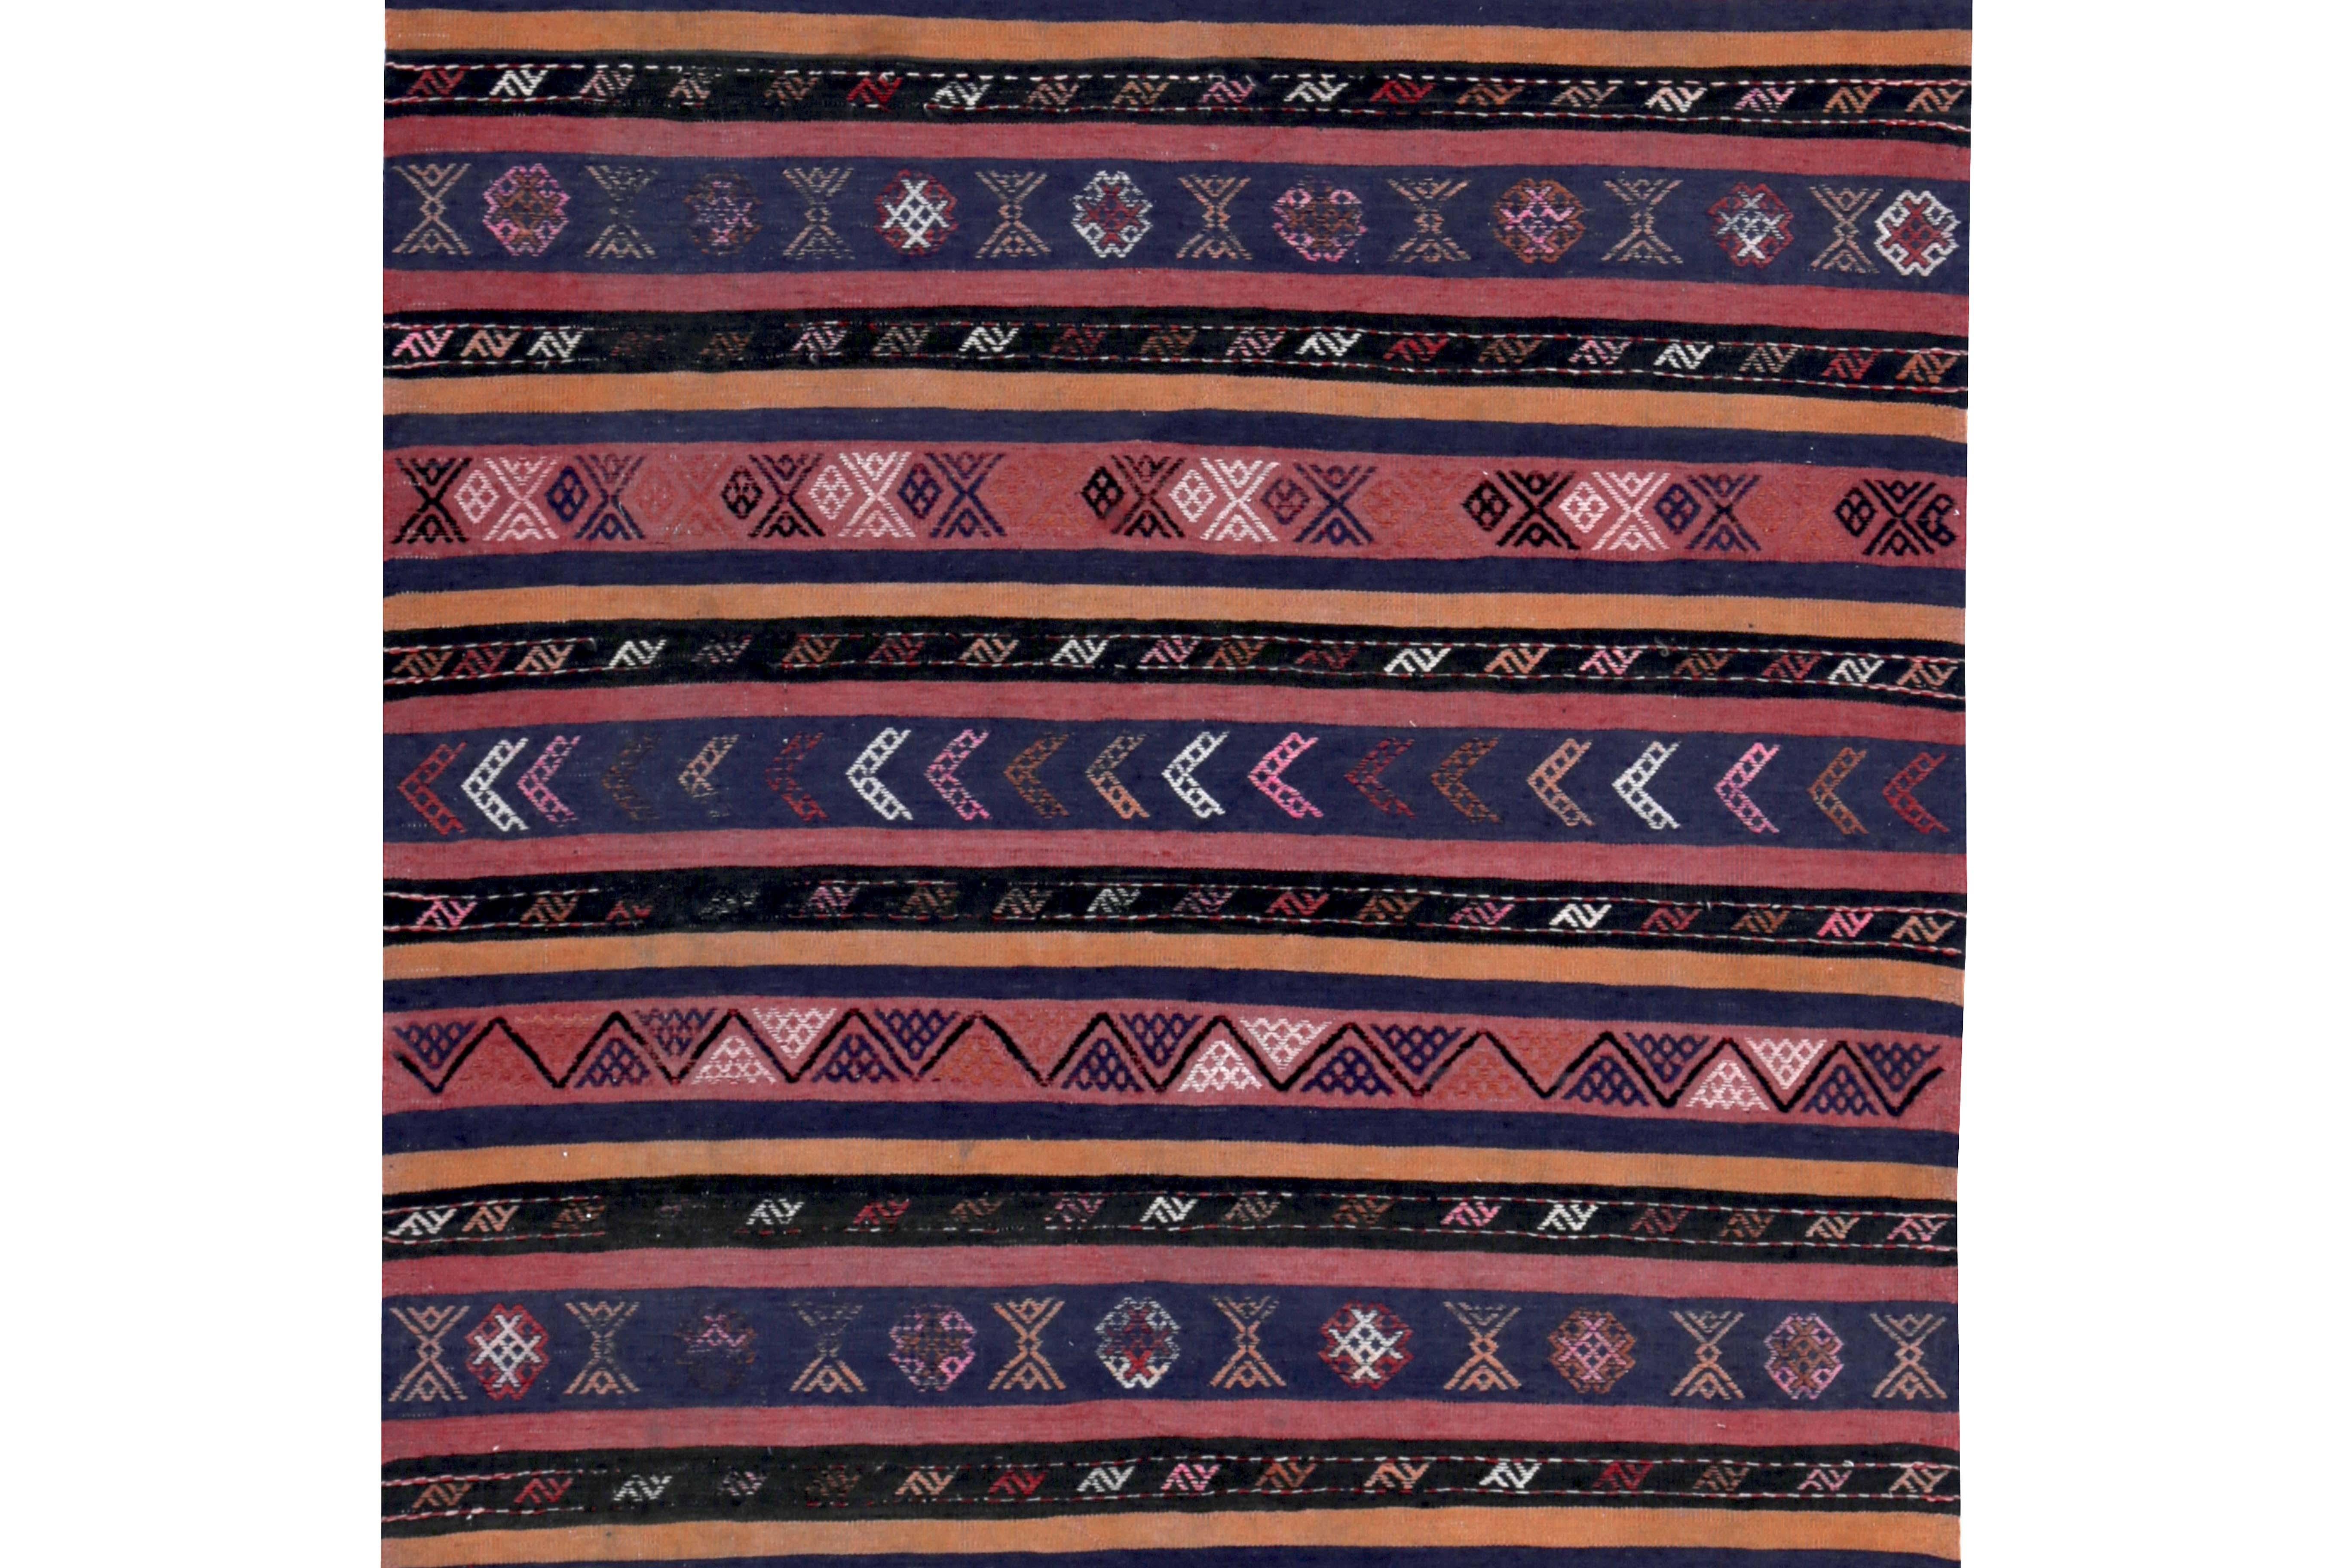 Hand-Woven Turkish Kilim Runner Rug with Blue, Orange and Pink Tribal Stripes For Sale